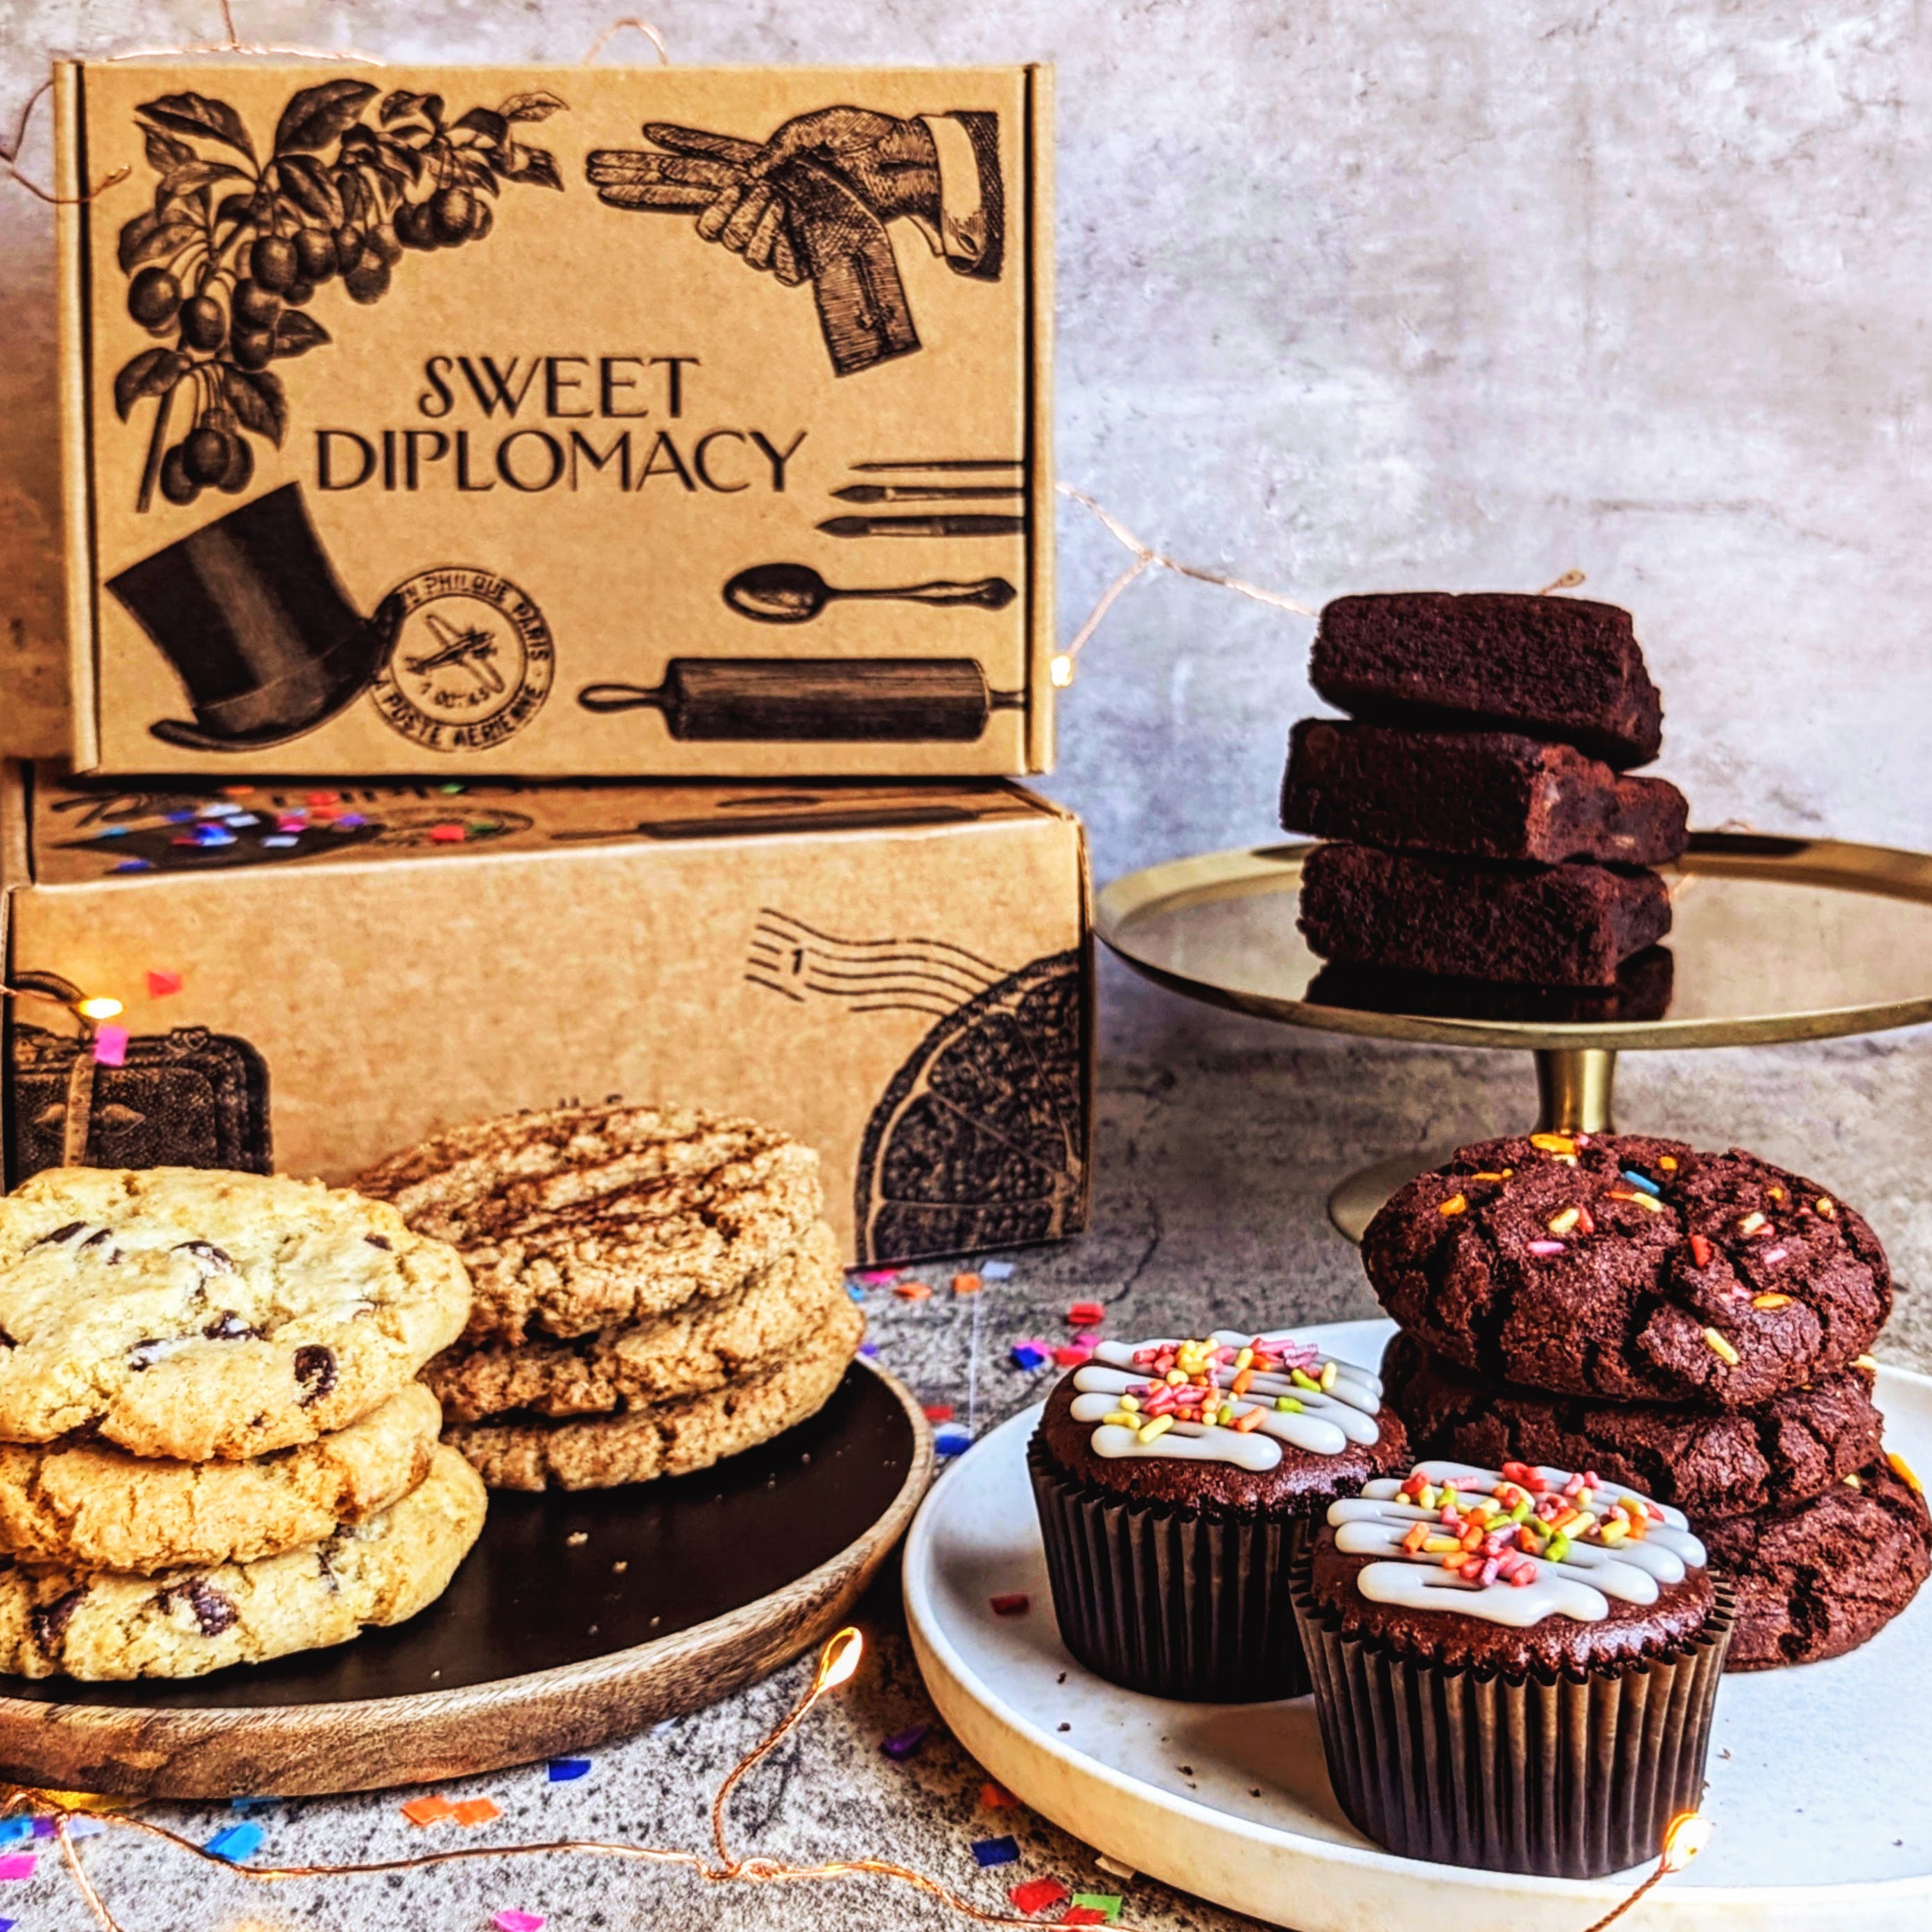 Sweet Diplomacy Cafe Noisette  Sweet Diplomacy® Gluten-Free Bakery - Los  Altos, CA - San Francisco Bay Area Delivery